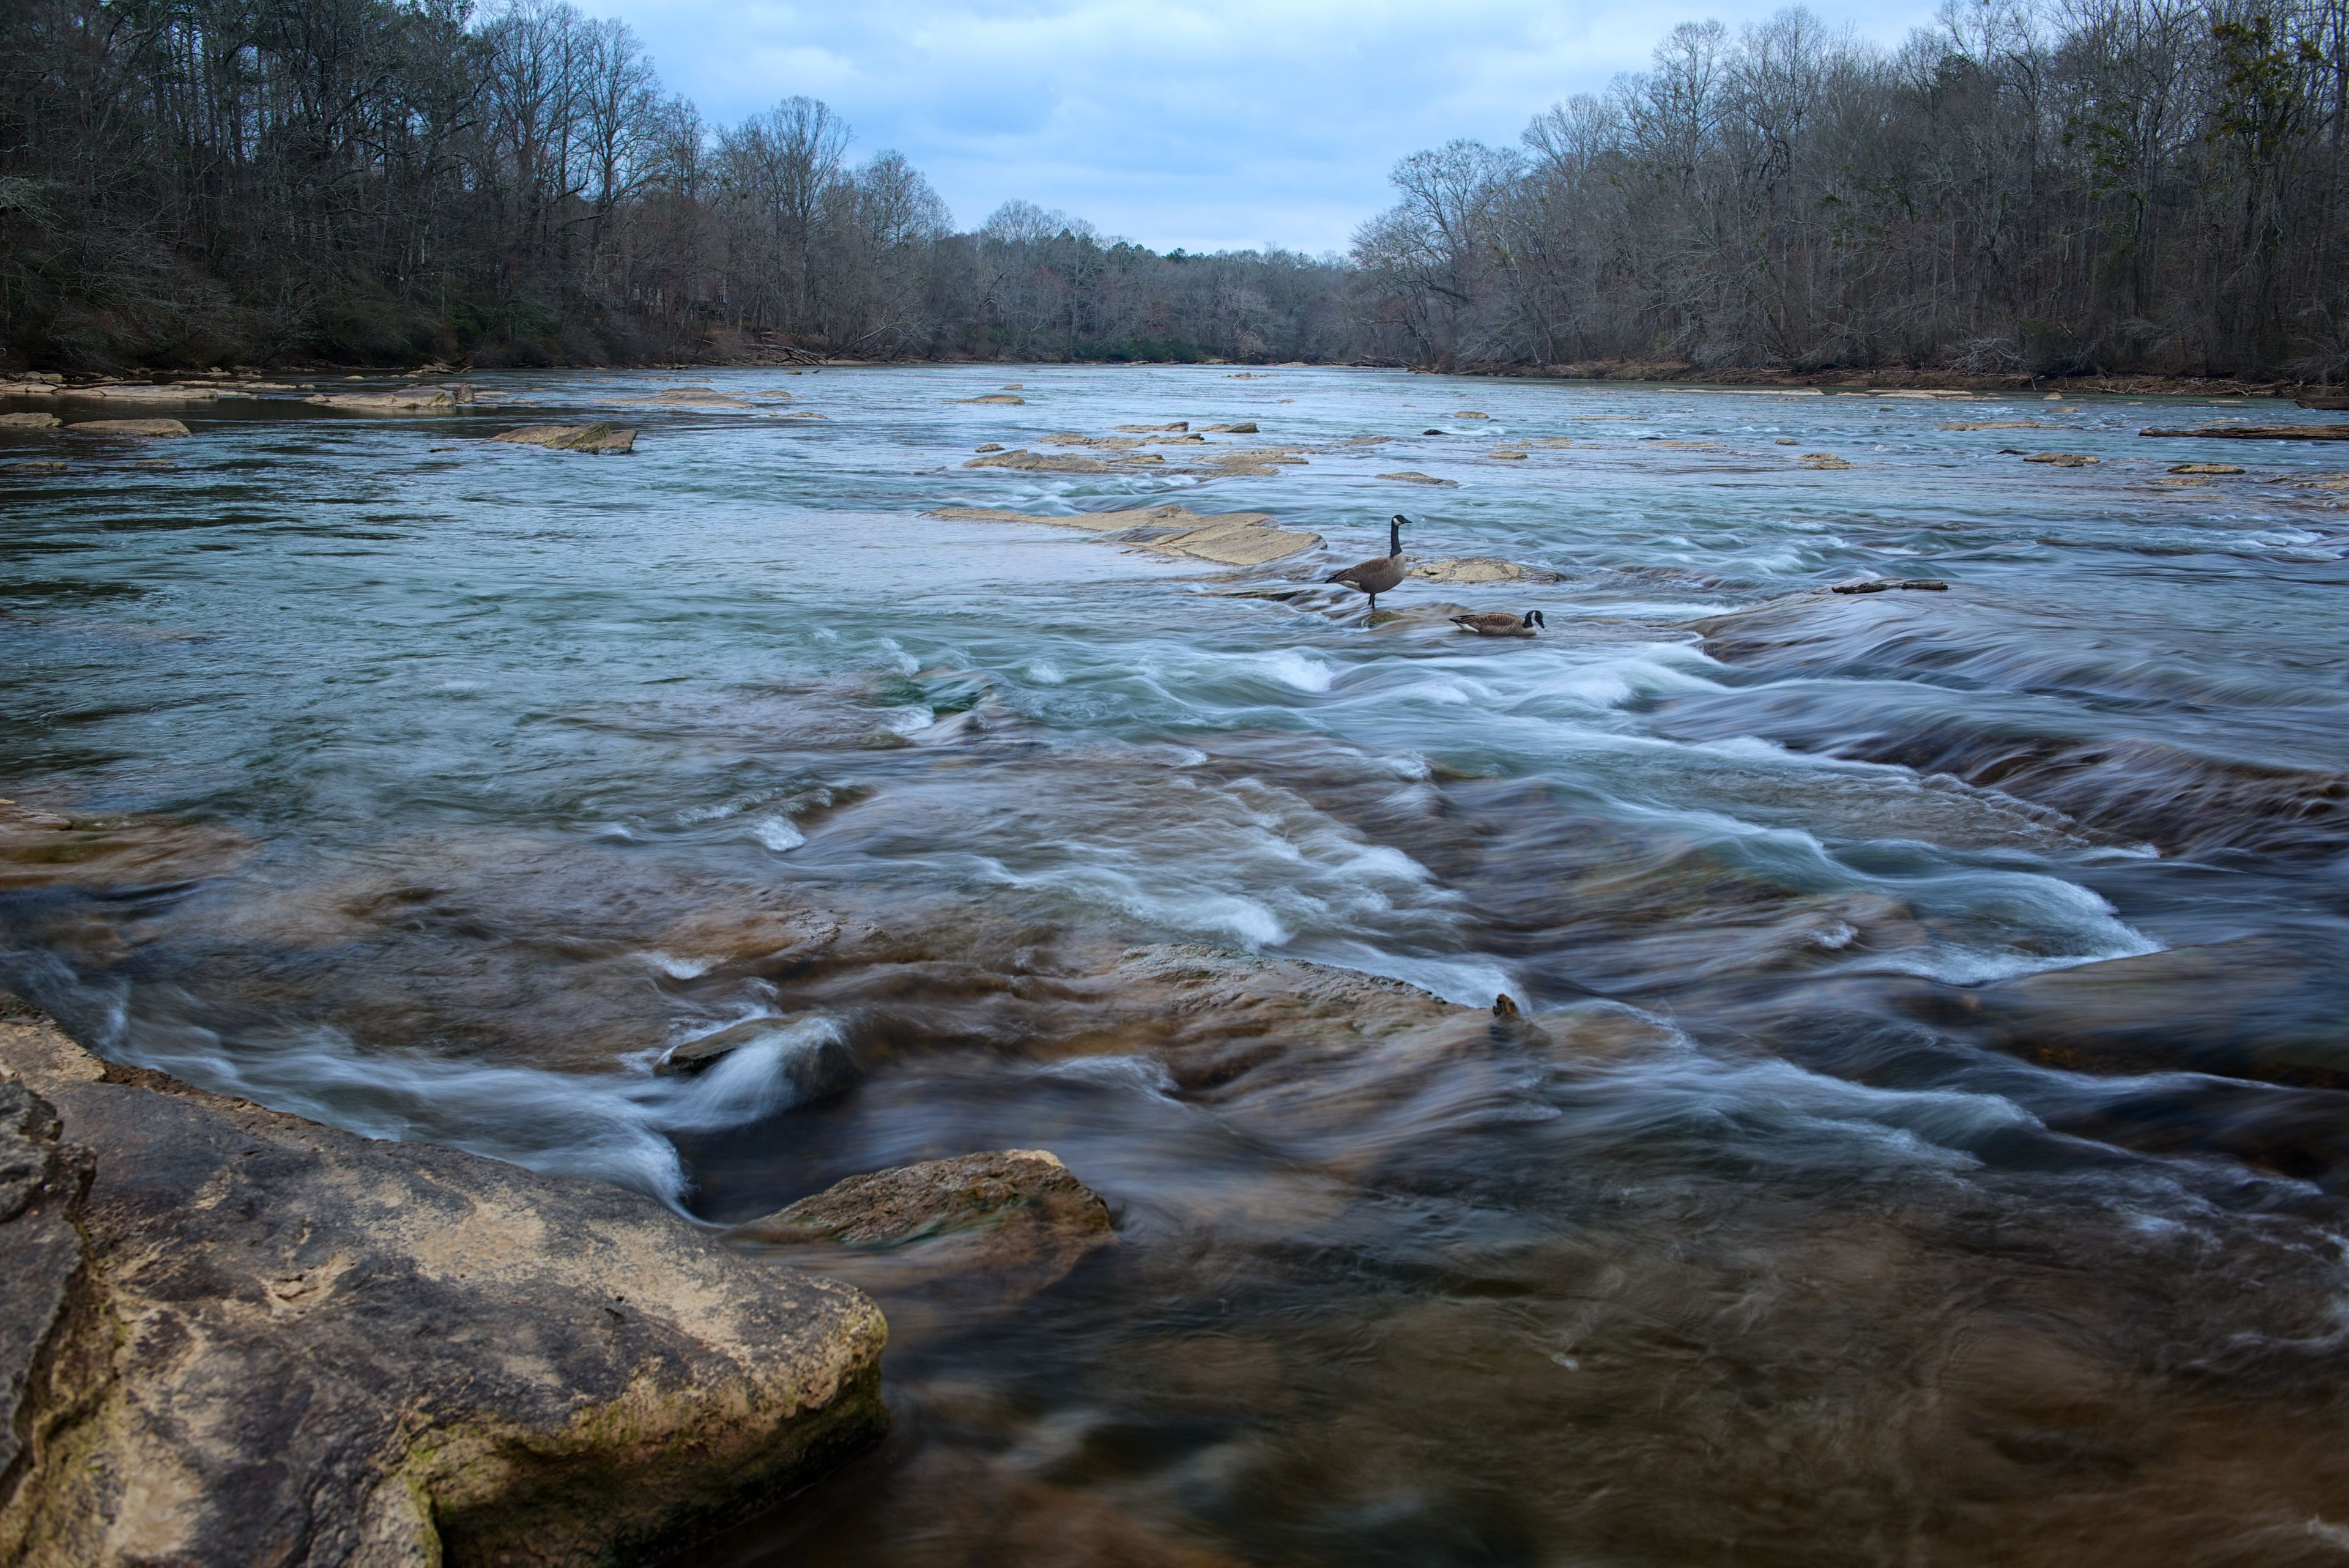 Two geese stand on rocks in the Chattahoochee River.